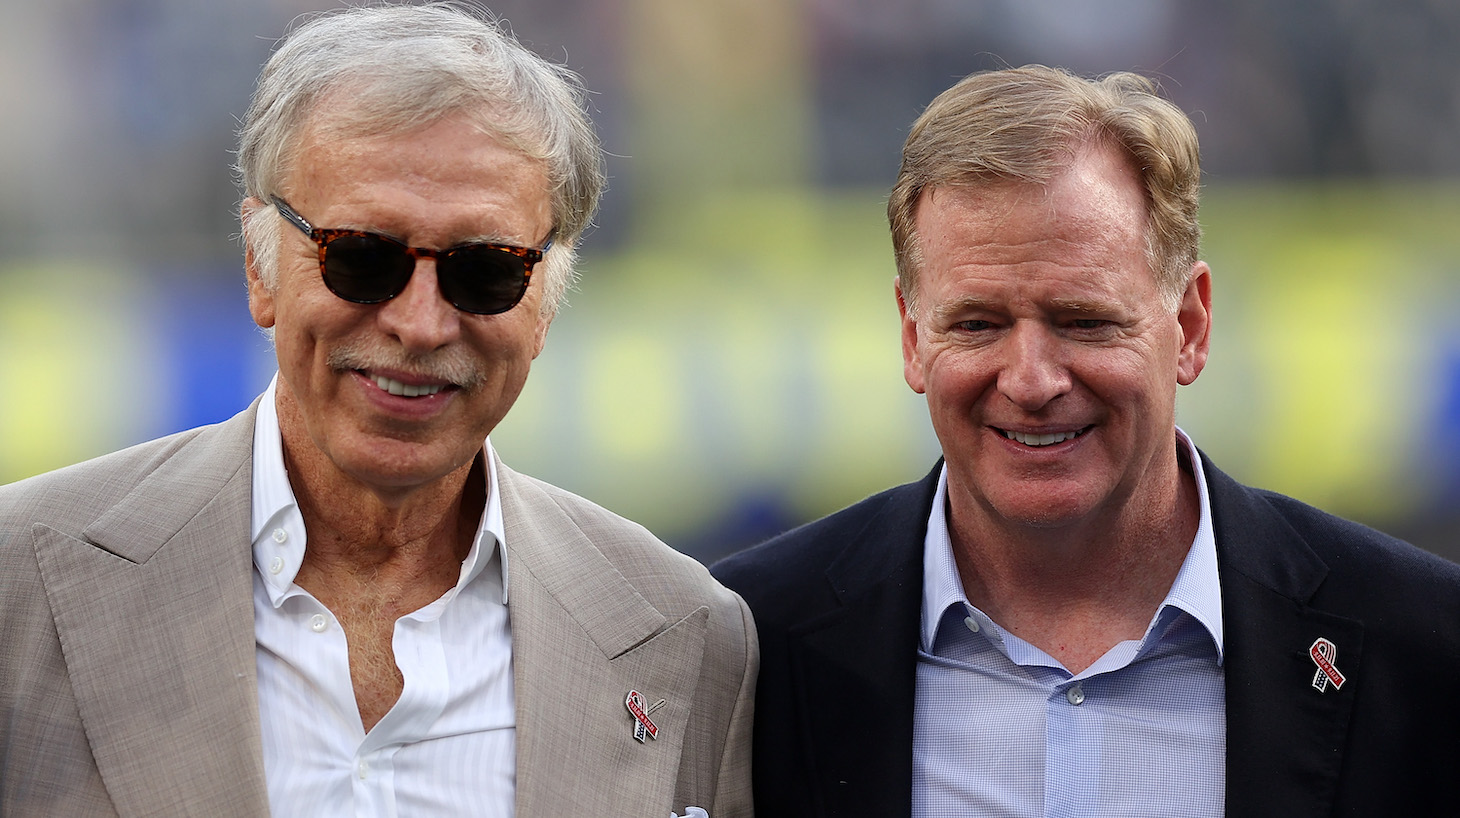 INGLEWOOD, CALIFORNIA - SEPTEMBER 12: Los Angeles Rams team owner Stan Kroenke and NFL commissioner Roger Goodell pose for a picture prior to a game against the Chicago Bears at SoFi Stadium on September 12, 2021 in Inglewood, California. (Photo by Ronald Martinez/Getty Images)